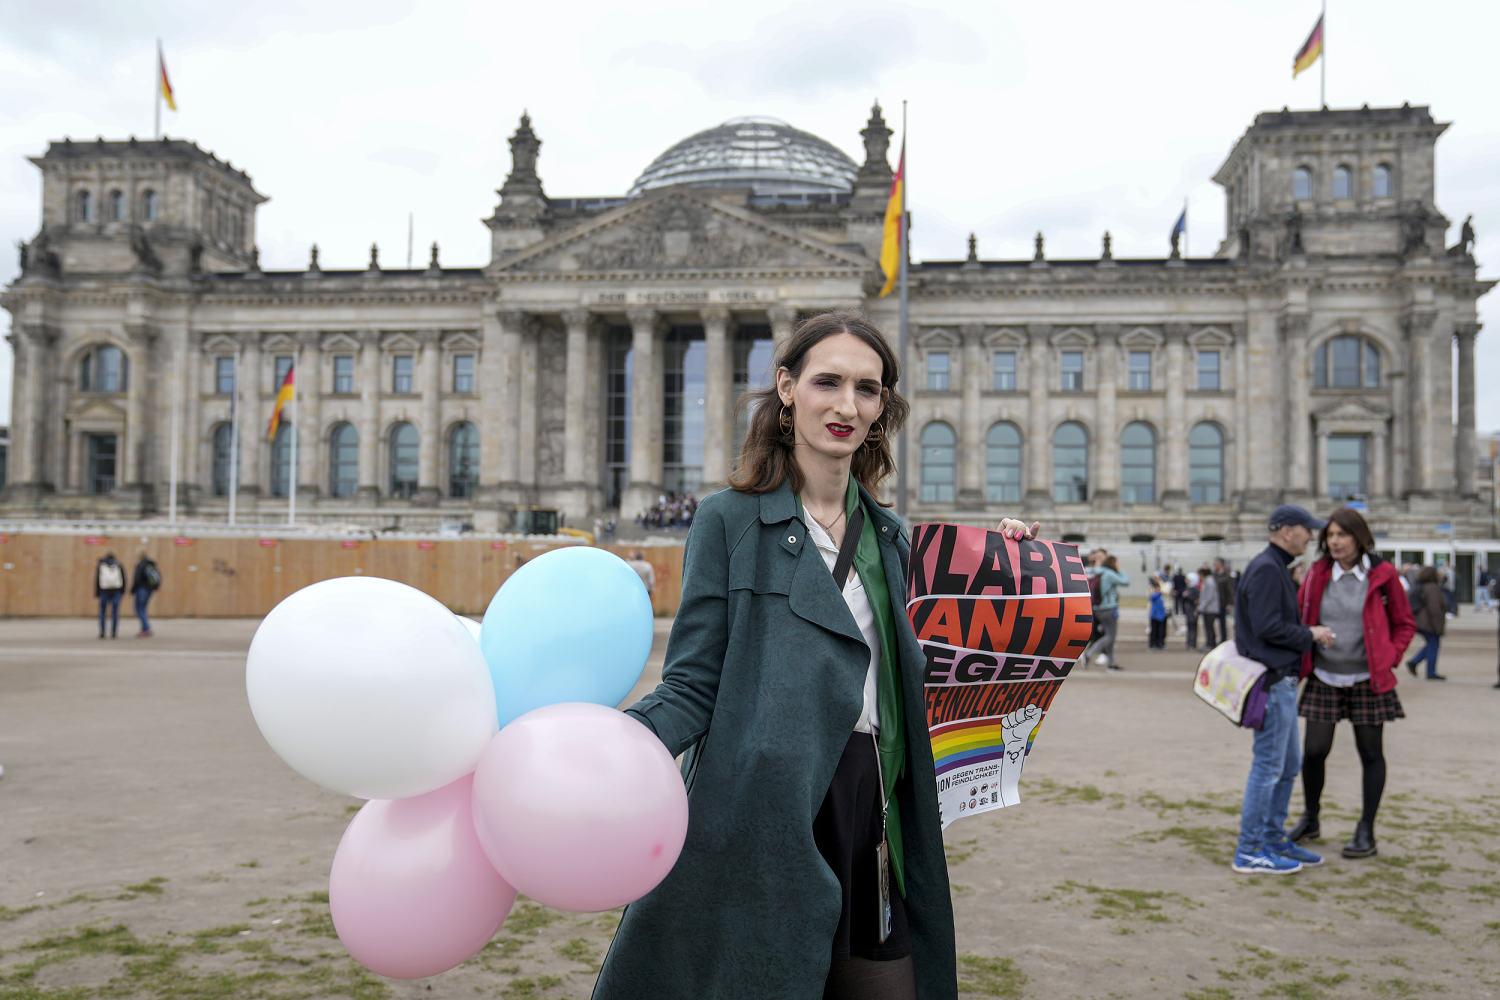 German parliament votes to make it easier for transgender people to change their name and gender